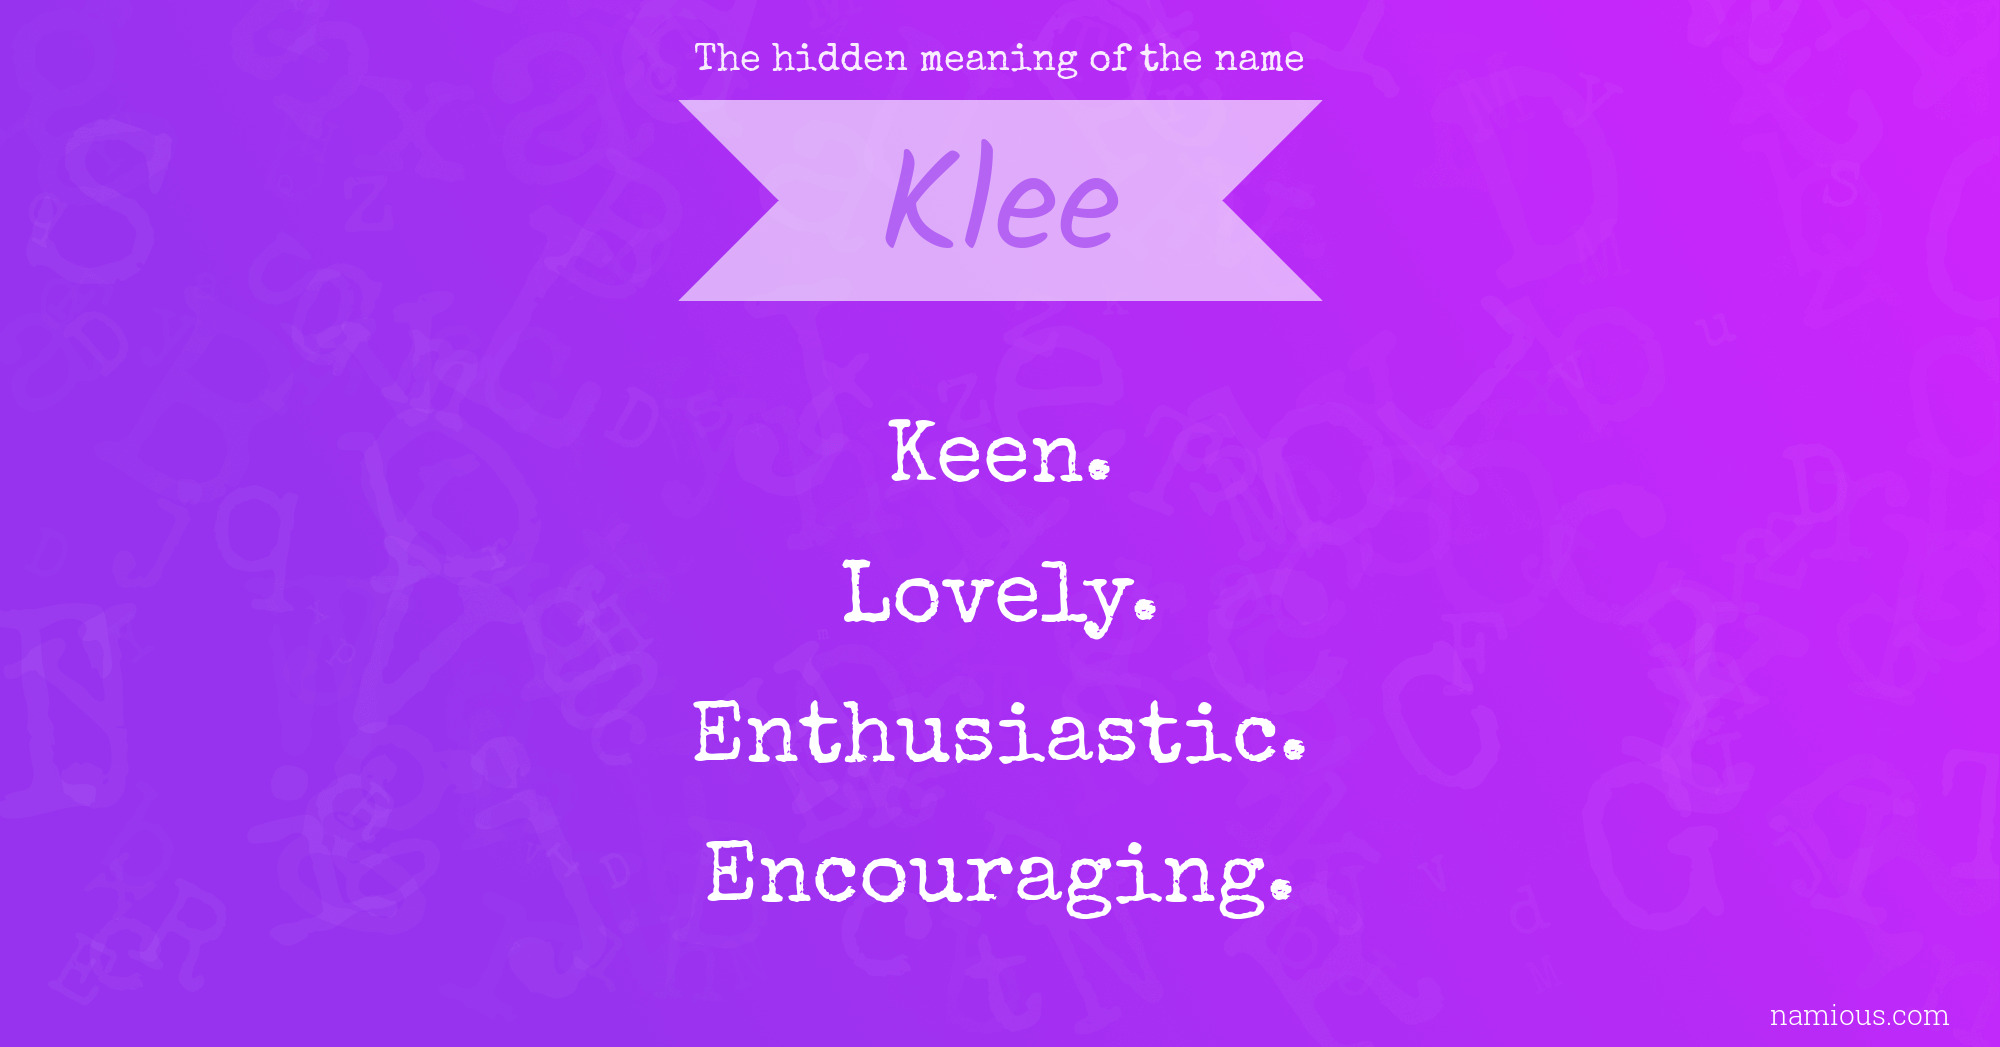 The hidden meaning of the name Klee